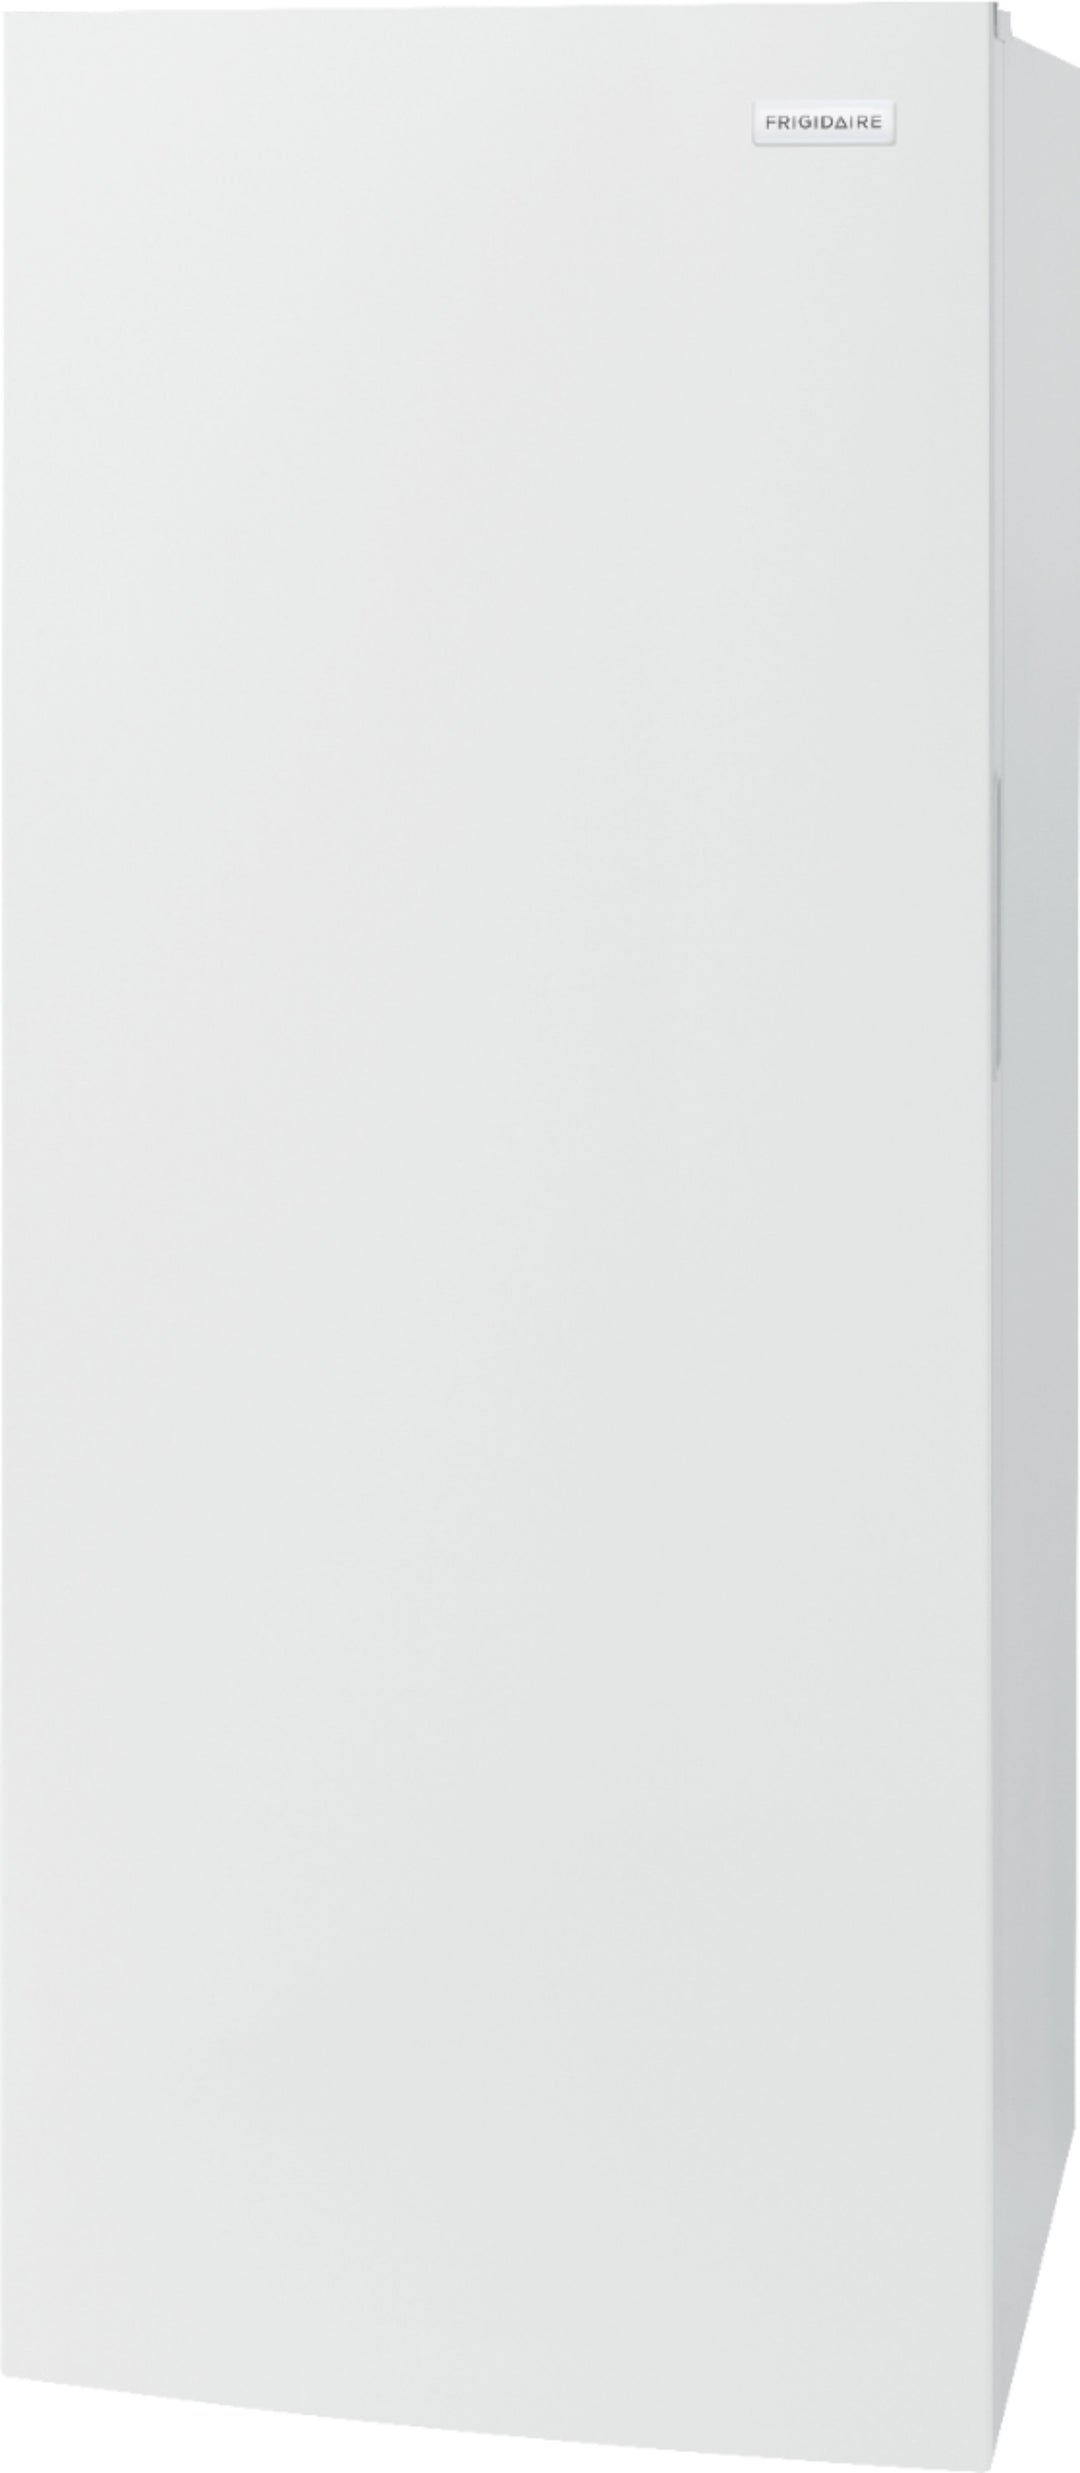 Frigidaire - 13.0 Cu. Ft. Frost-Free Upright Freezer with Interior Light - White_2